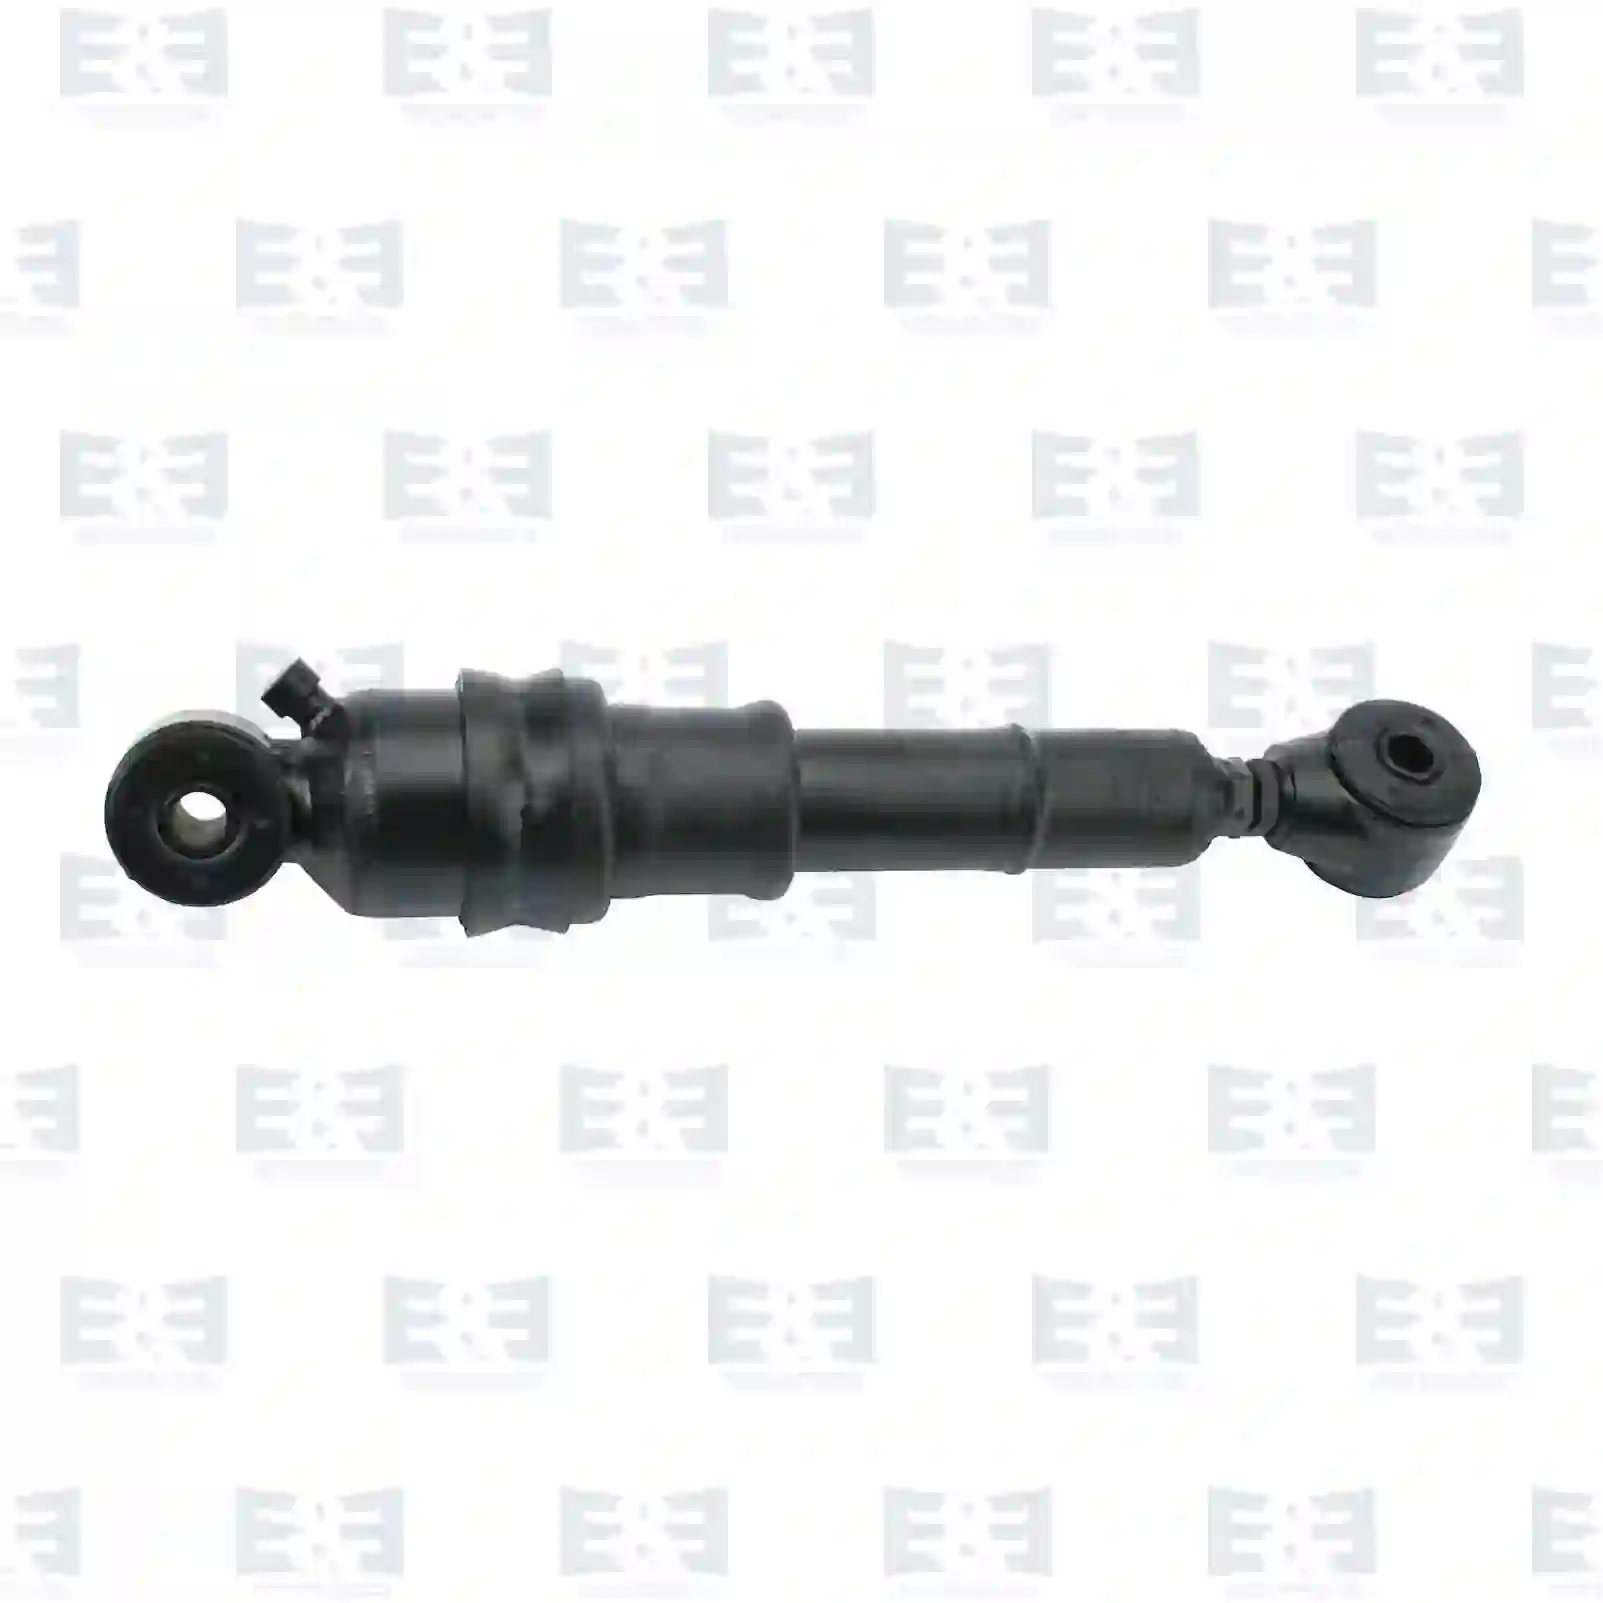 Cabin shock absorber, with air bellow, 2E2276370, 1099672 ||  2E2276370 E&E Truck Spare Parts | Truck Spare Parts, Auotomotive Spare Parts Cabin shock absorber, with air bellow, 2E2276370, 1099672 ||  2E2276370 E&E Truck Spare Parts | Truck Spare Parts, Auotomotive Spare Parts